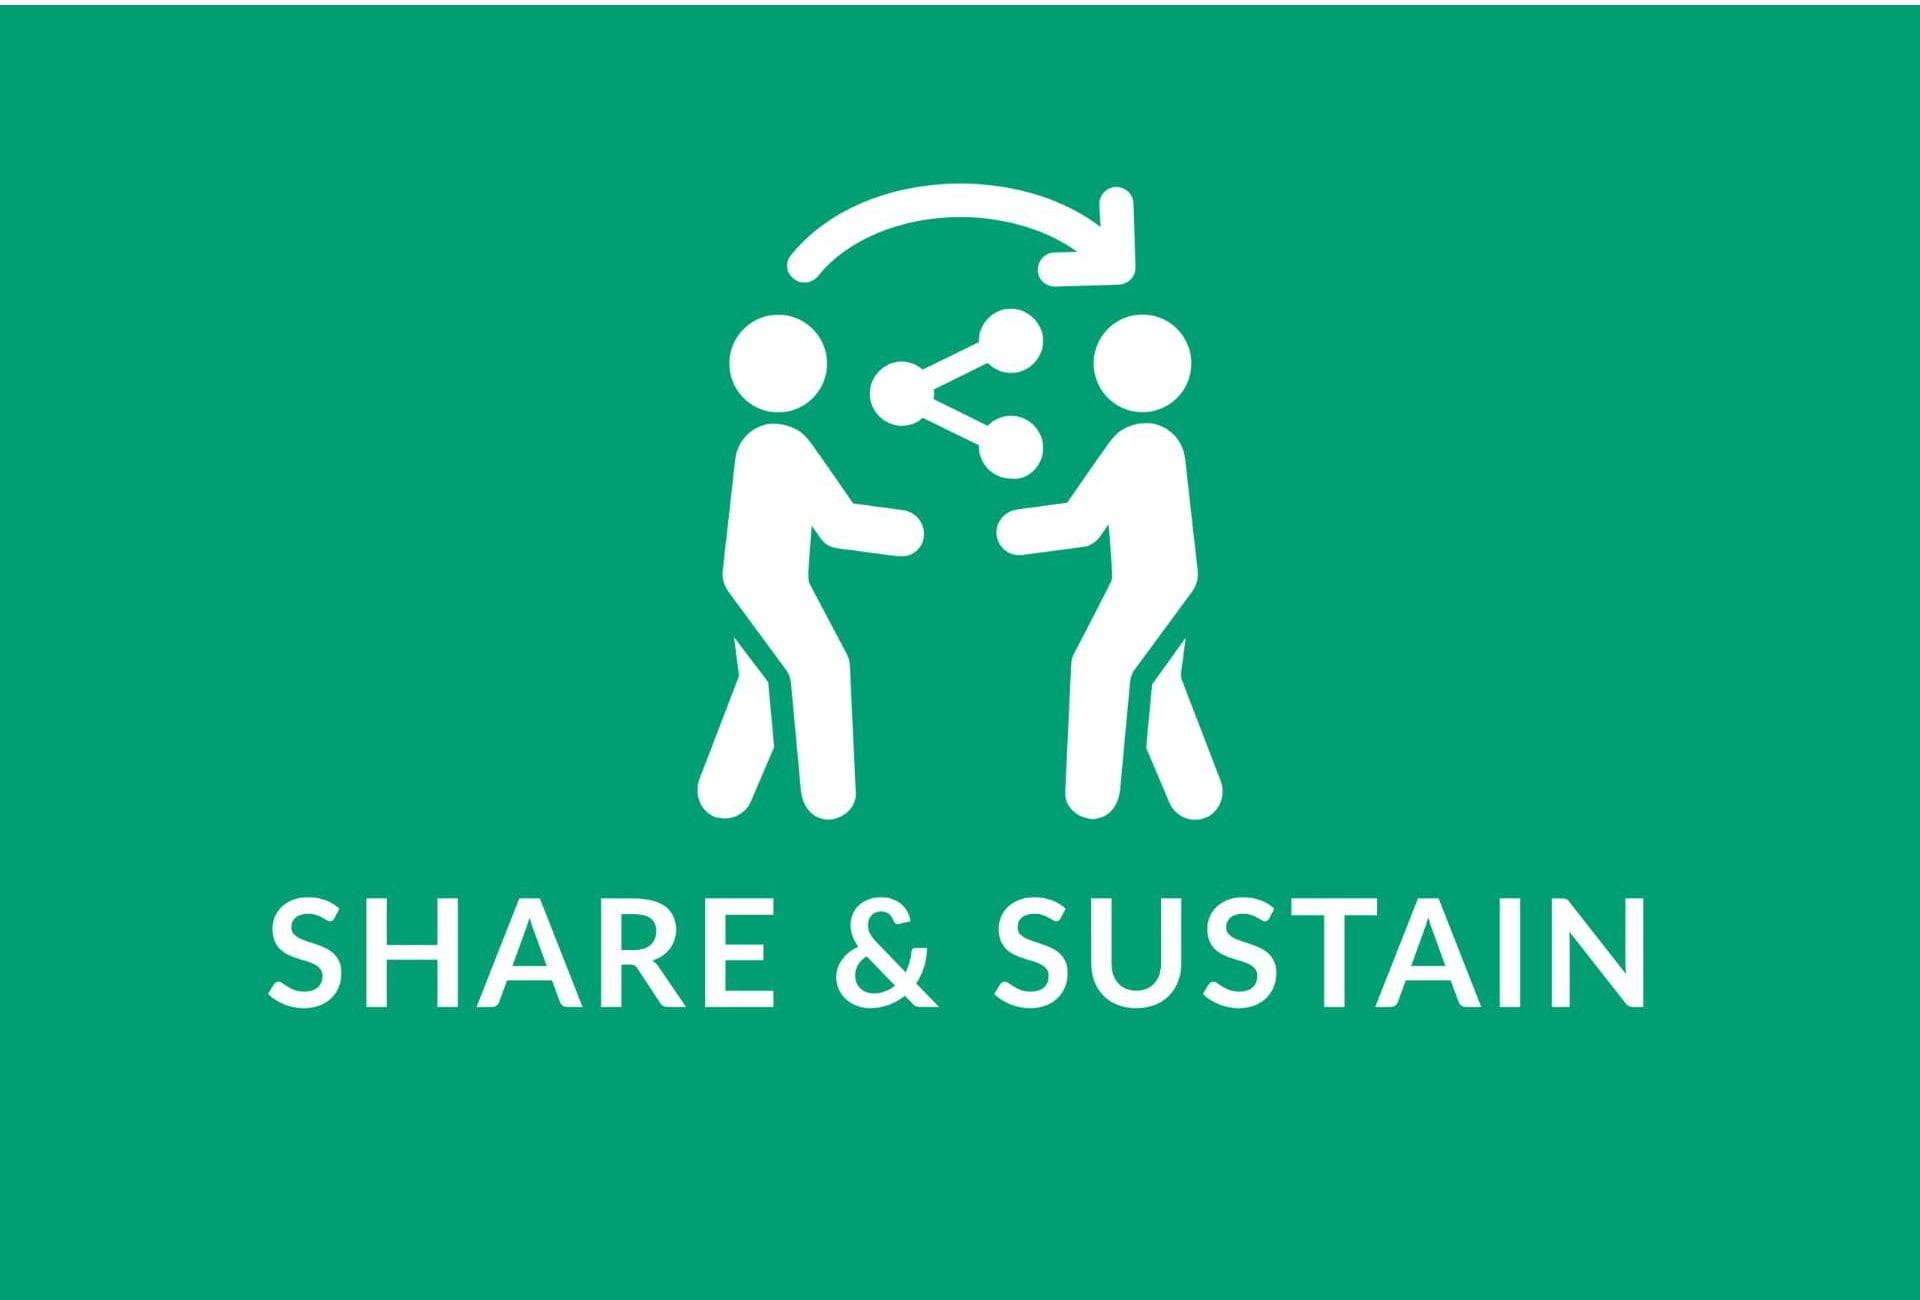 Green rectangle with the words Share and Sustain and an icon of two people facing each other. The Share symbol is between them and there is an arrow over their heads pointing from the person on the left to the person on the right.